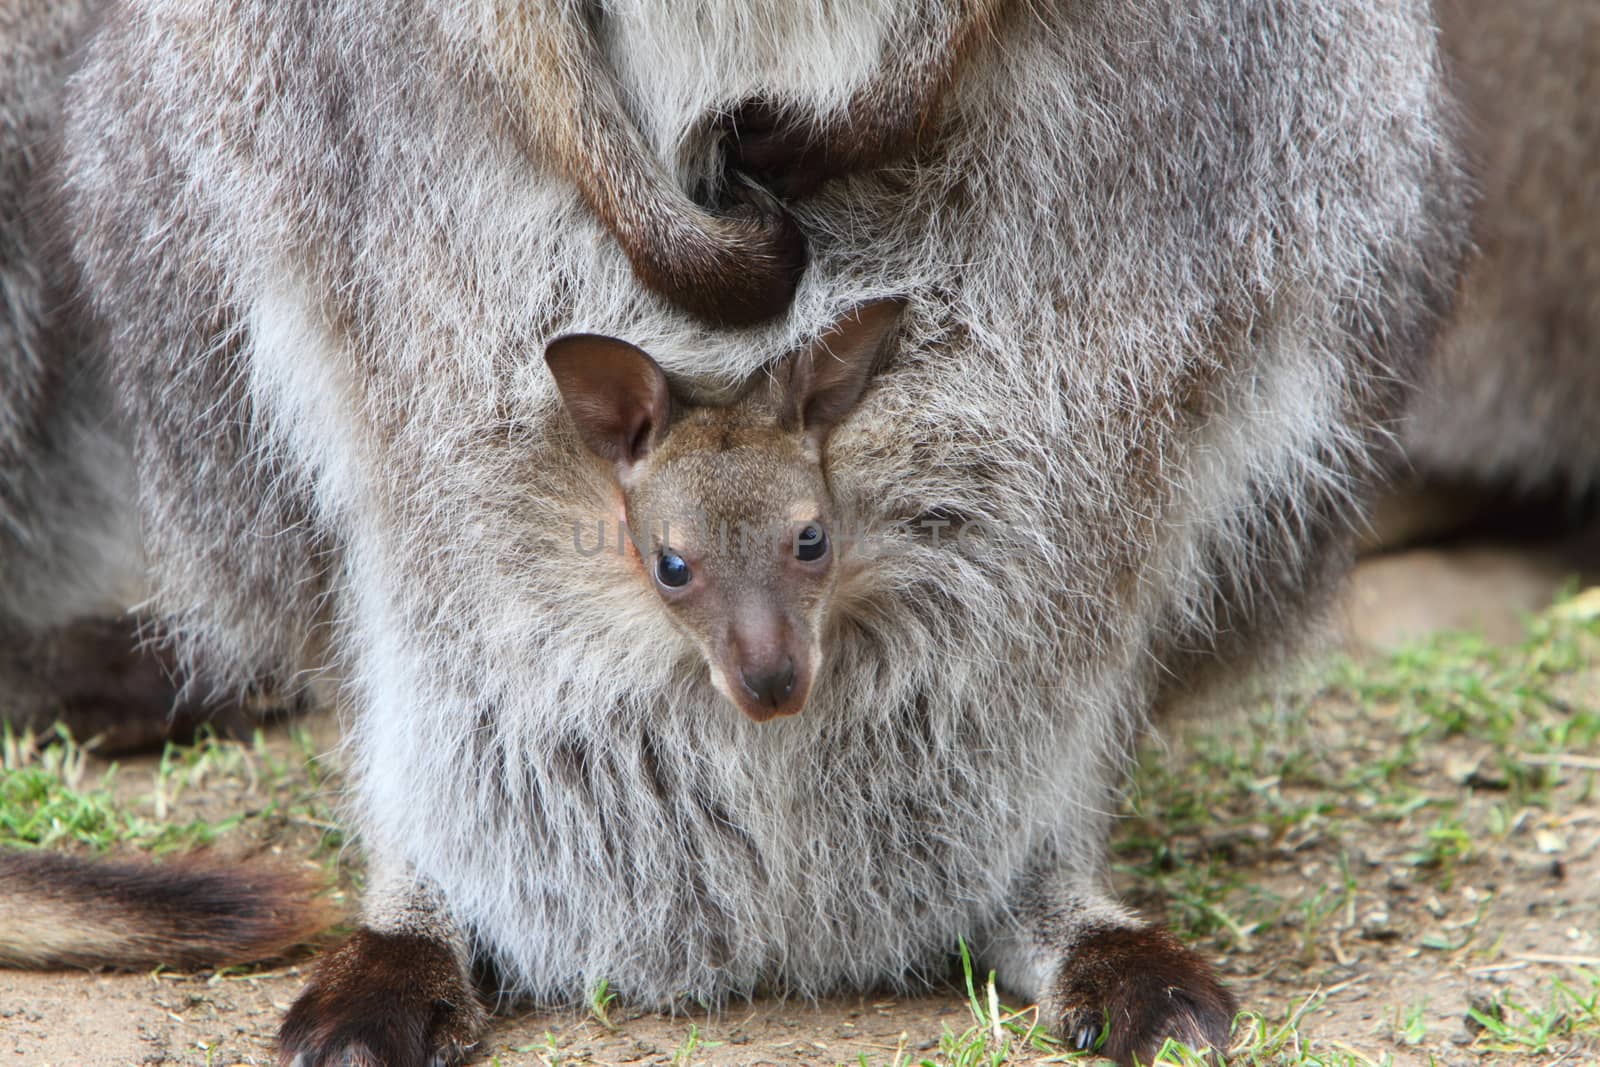 Wallaby joey by mitzy